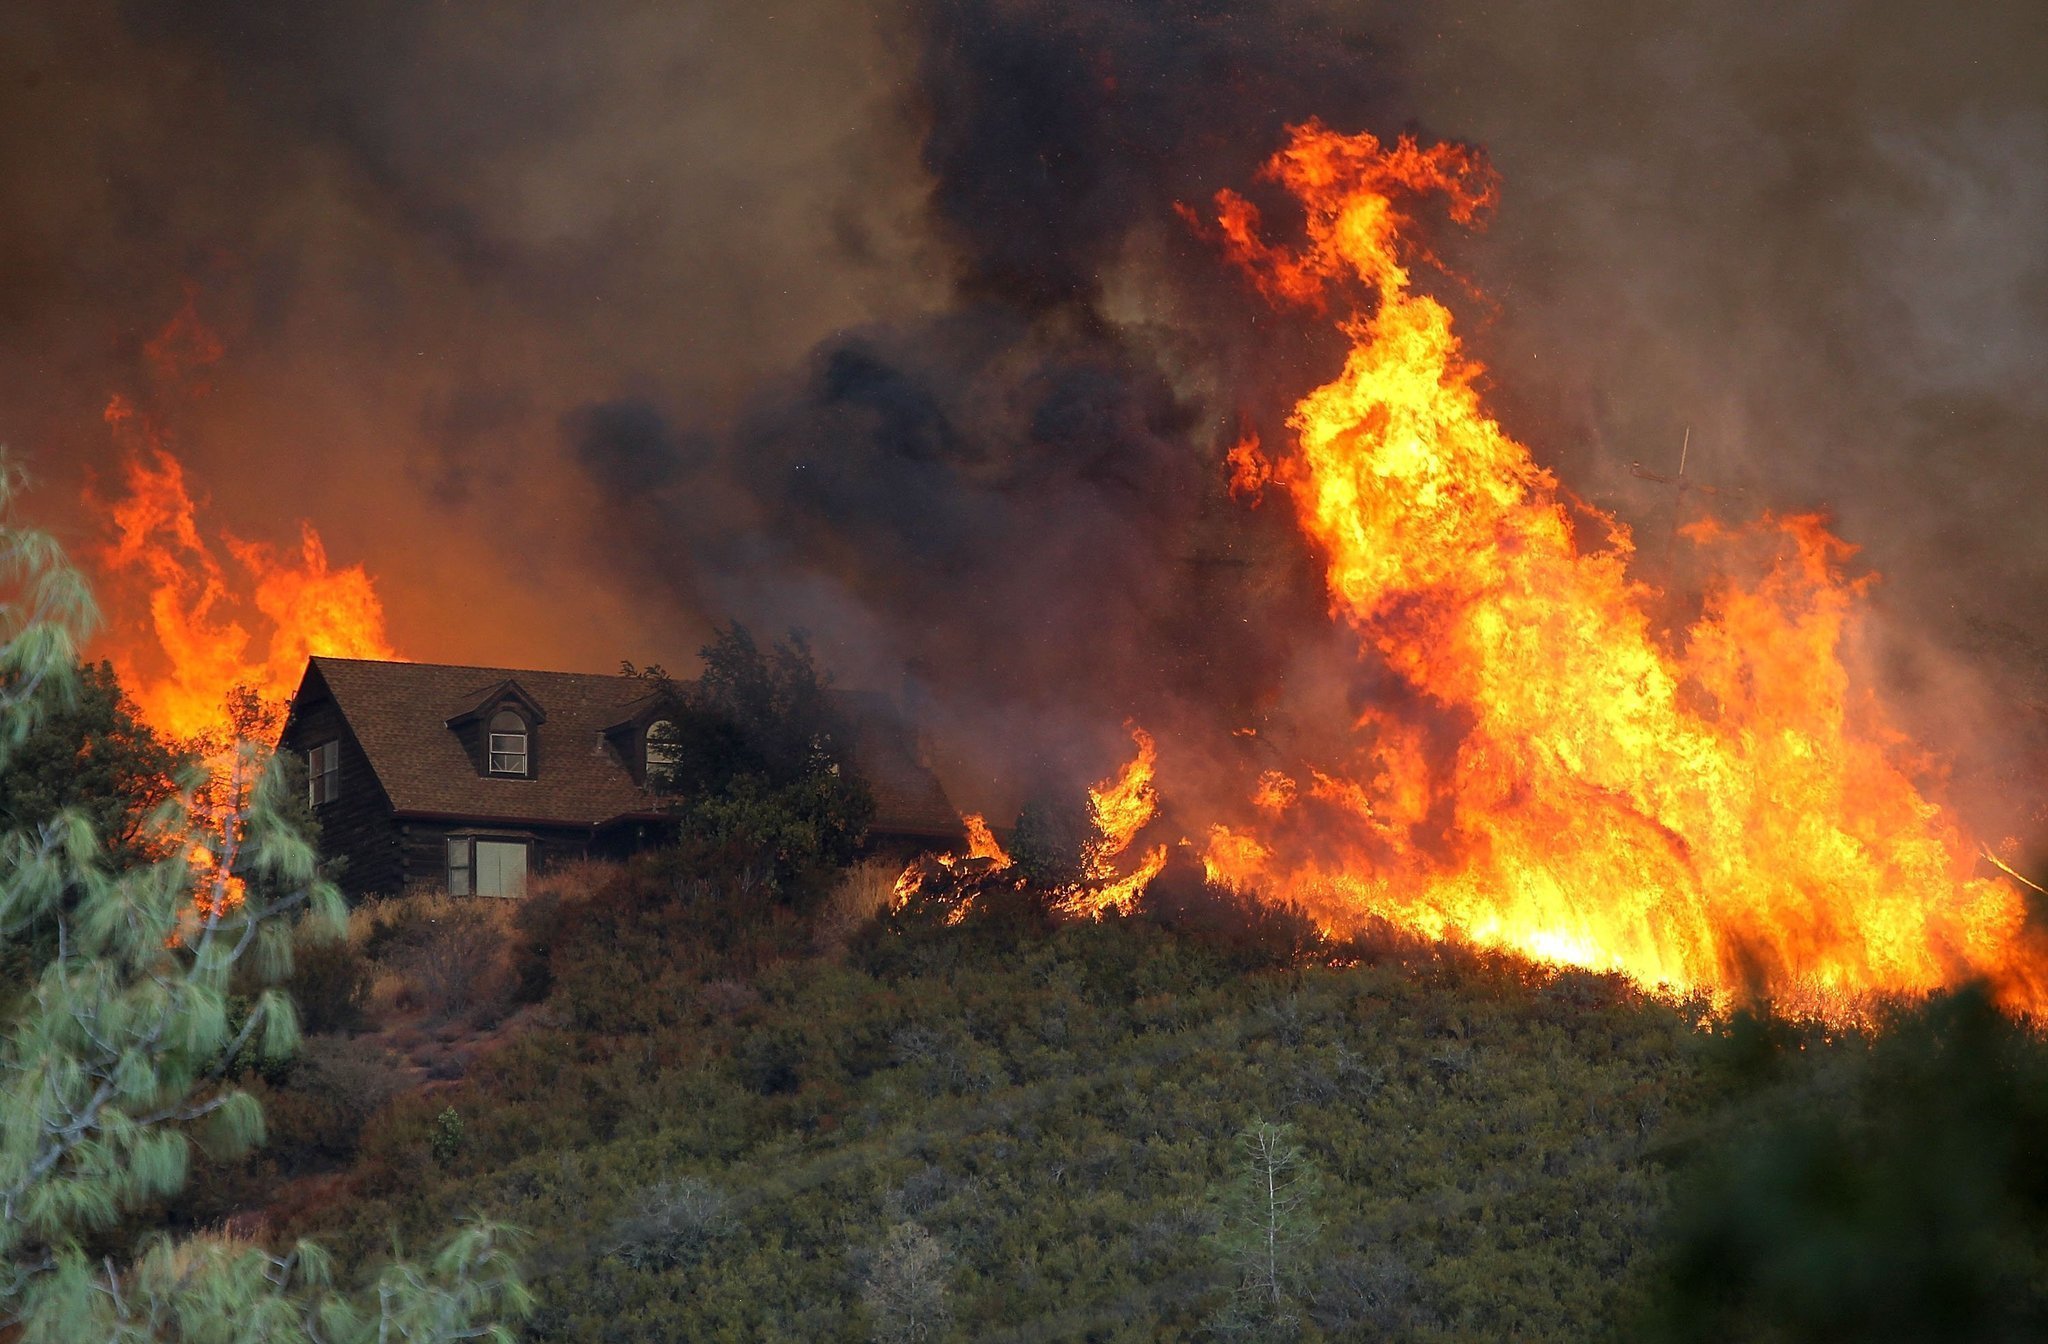 la-me-ln-northern-california-fire-explodes-24-homes-lost-thousands-threatened-20150802.jpg